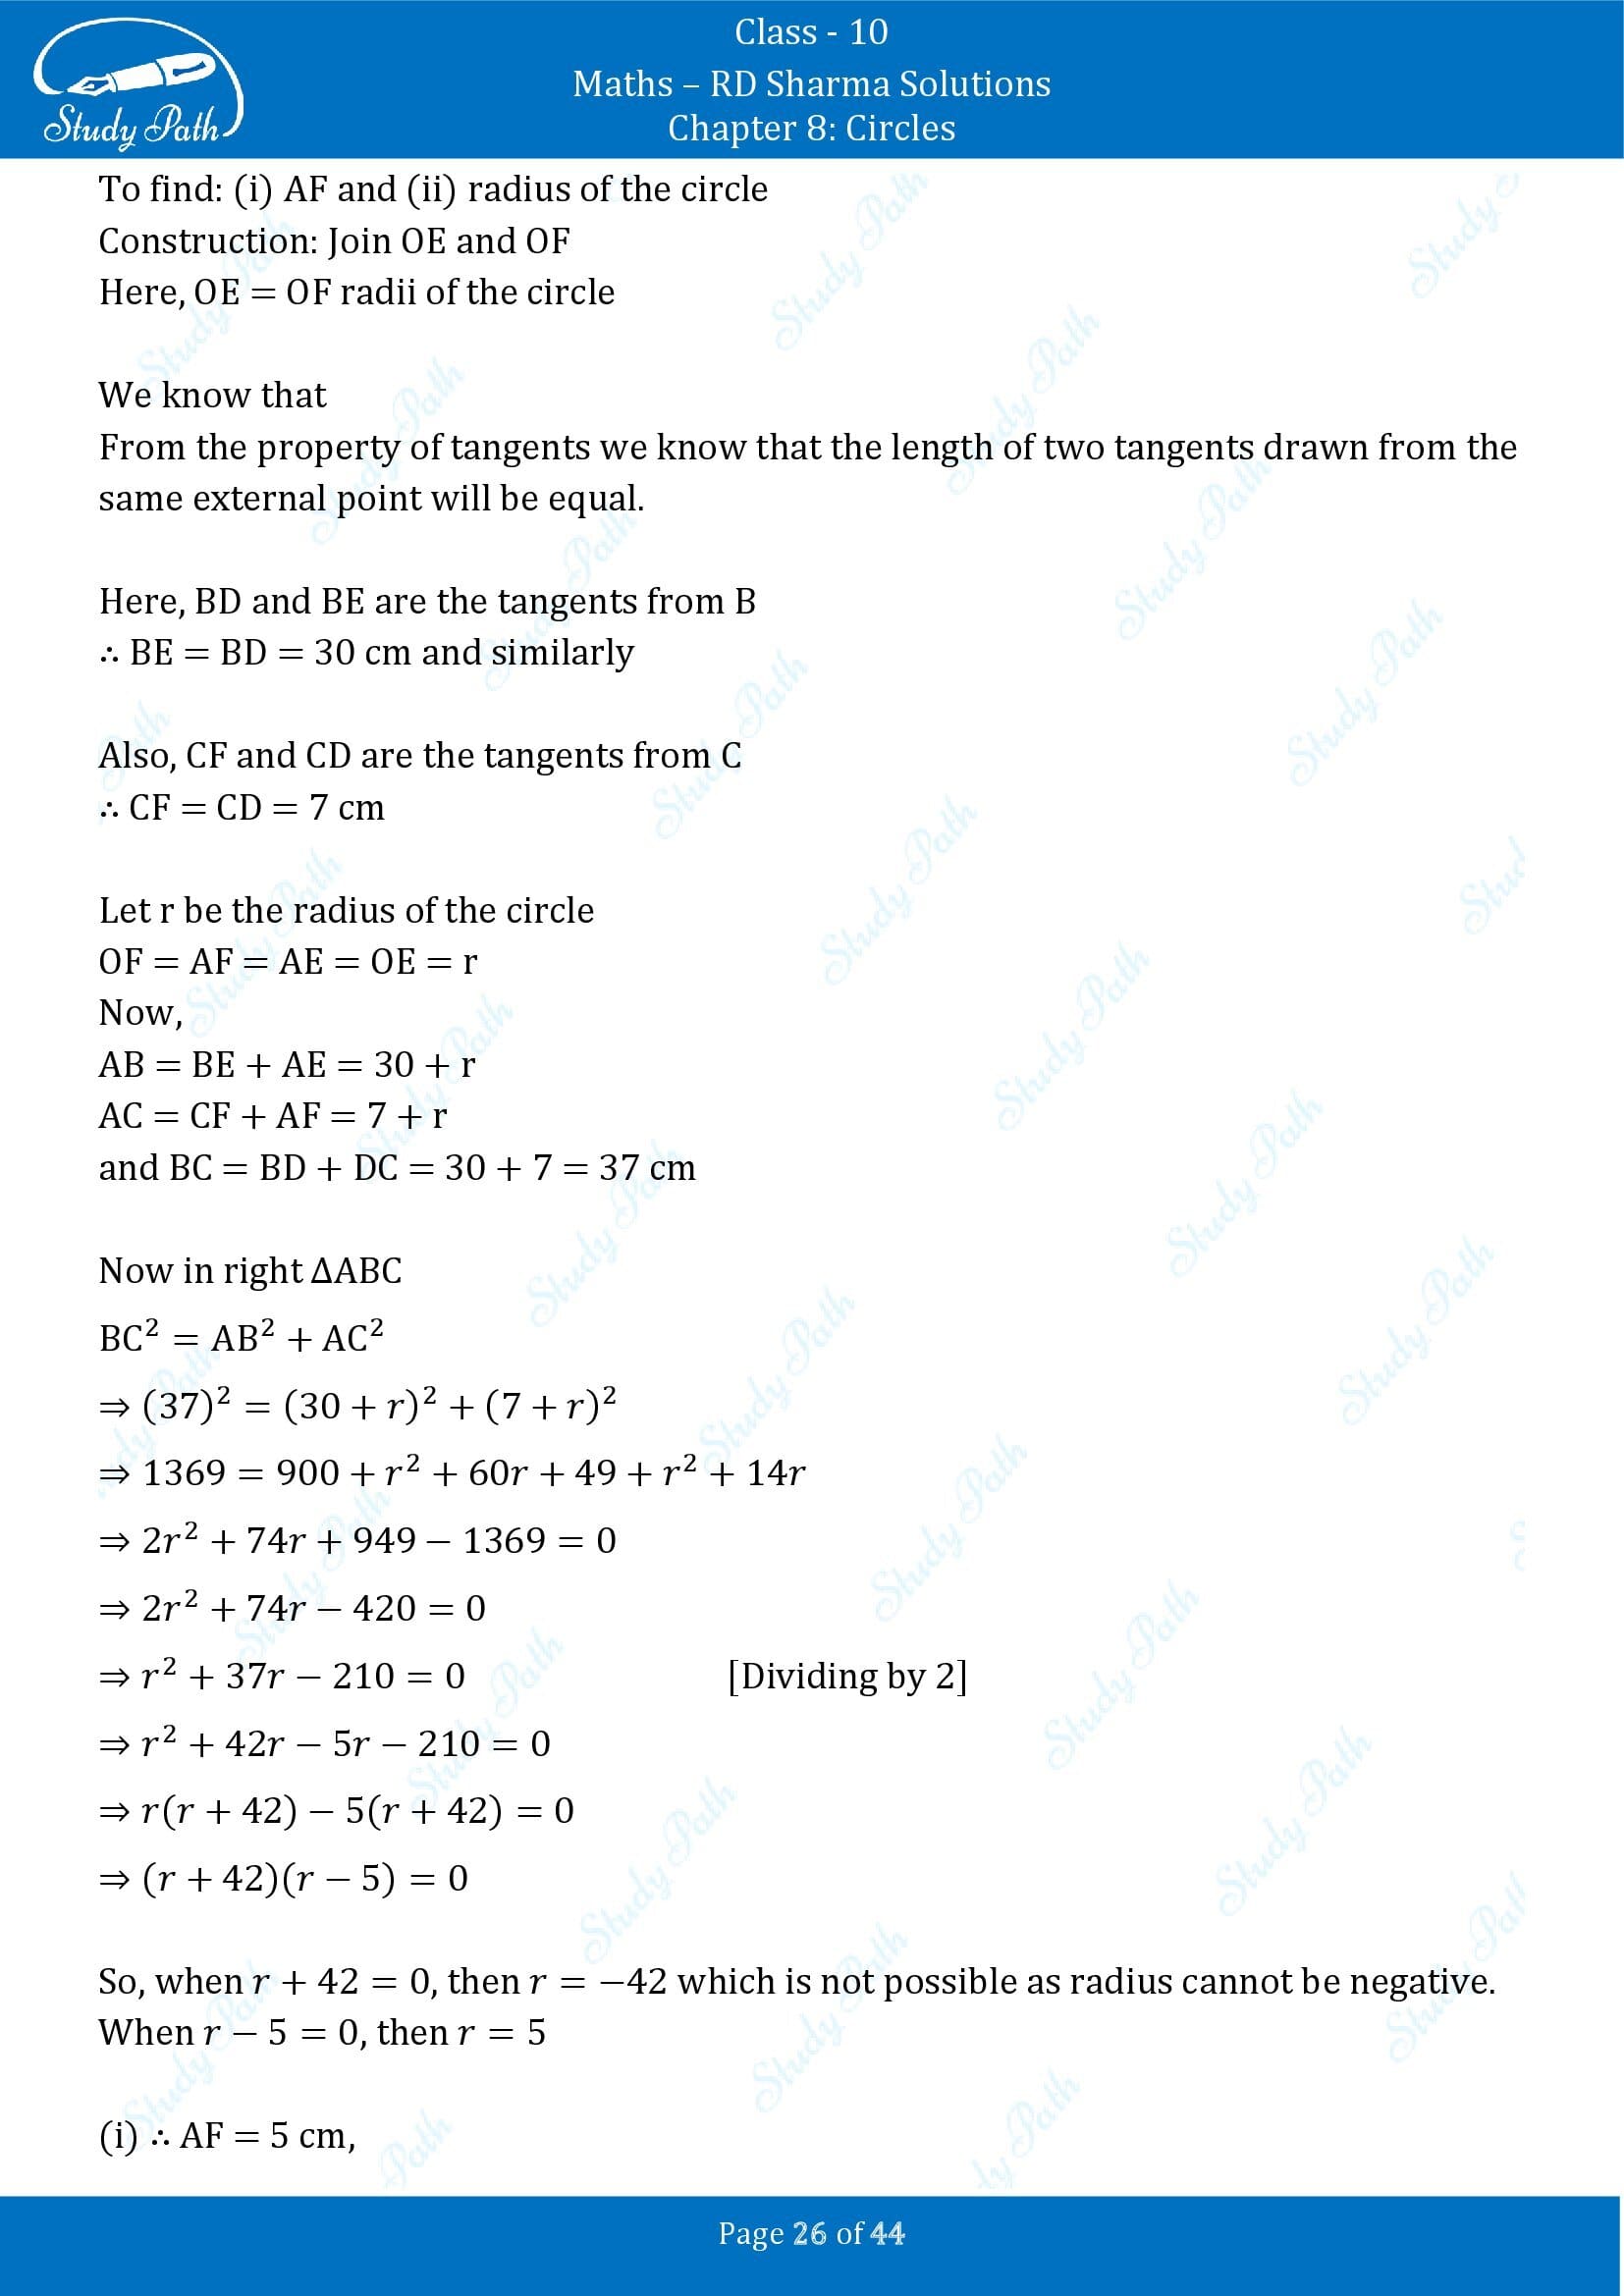 RD Sharma Solutions Class 10 Chapter 8 Circles Exercise 8.2 00026